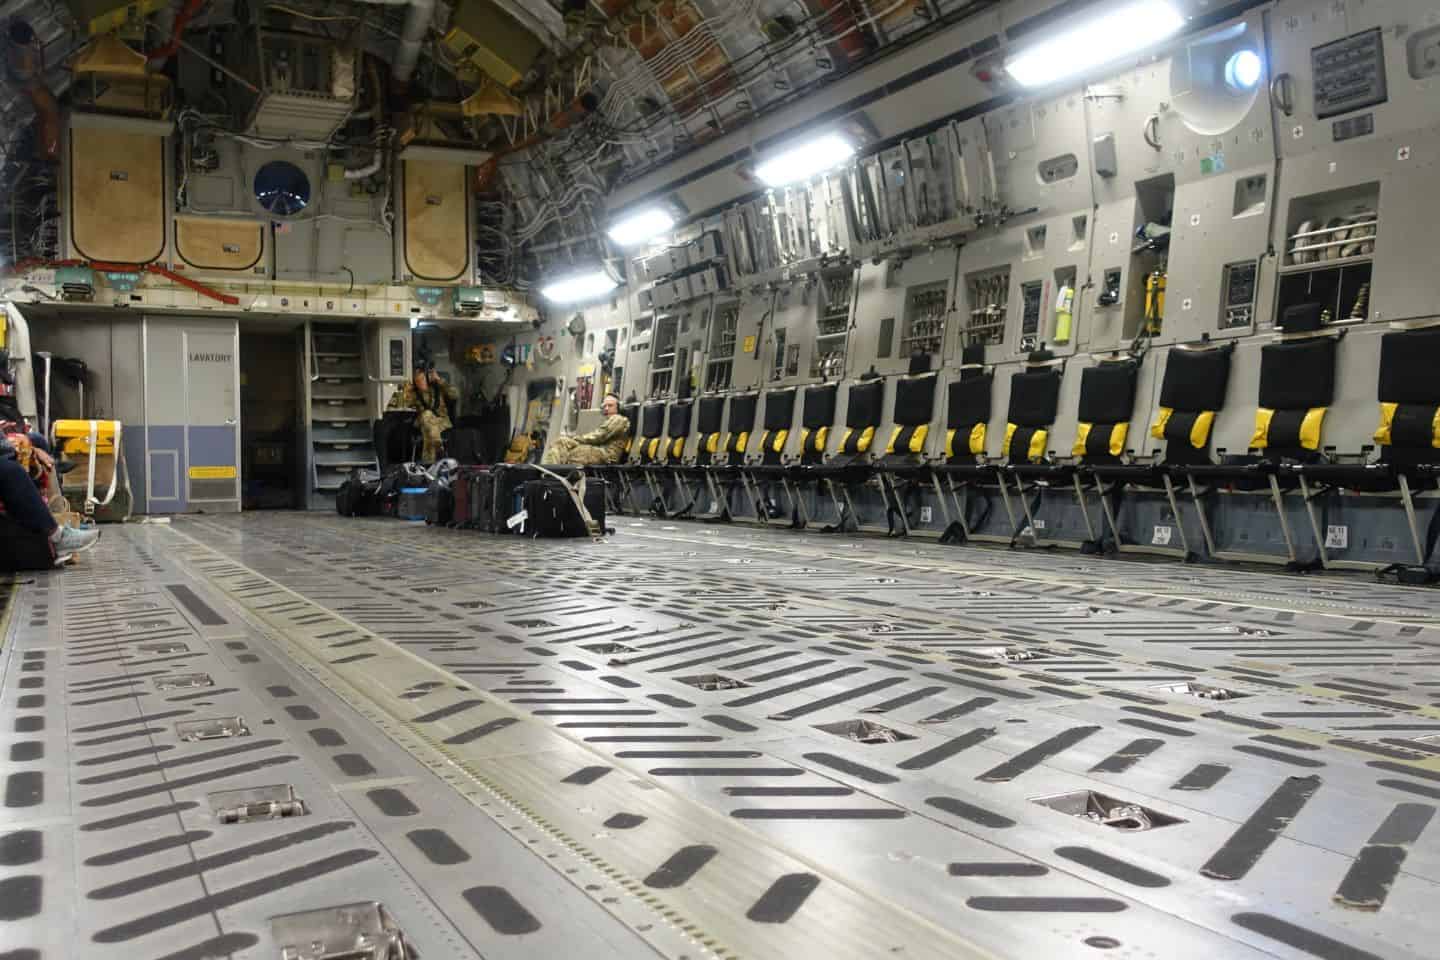 Empty seats along the walls of a military cargo plane